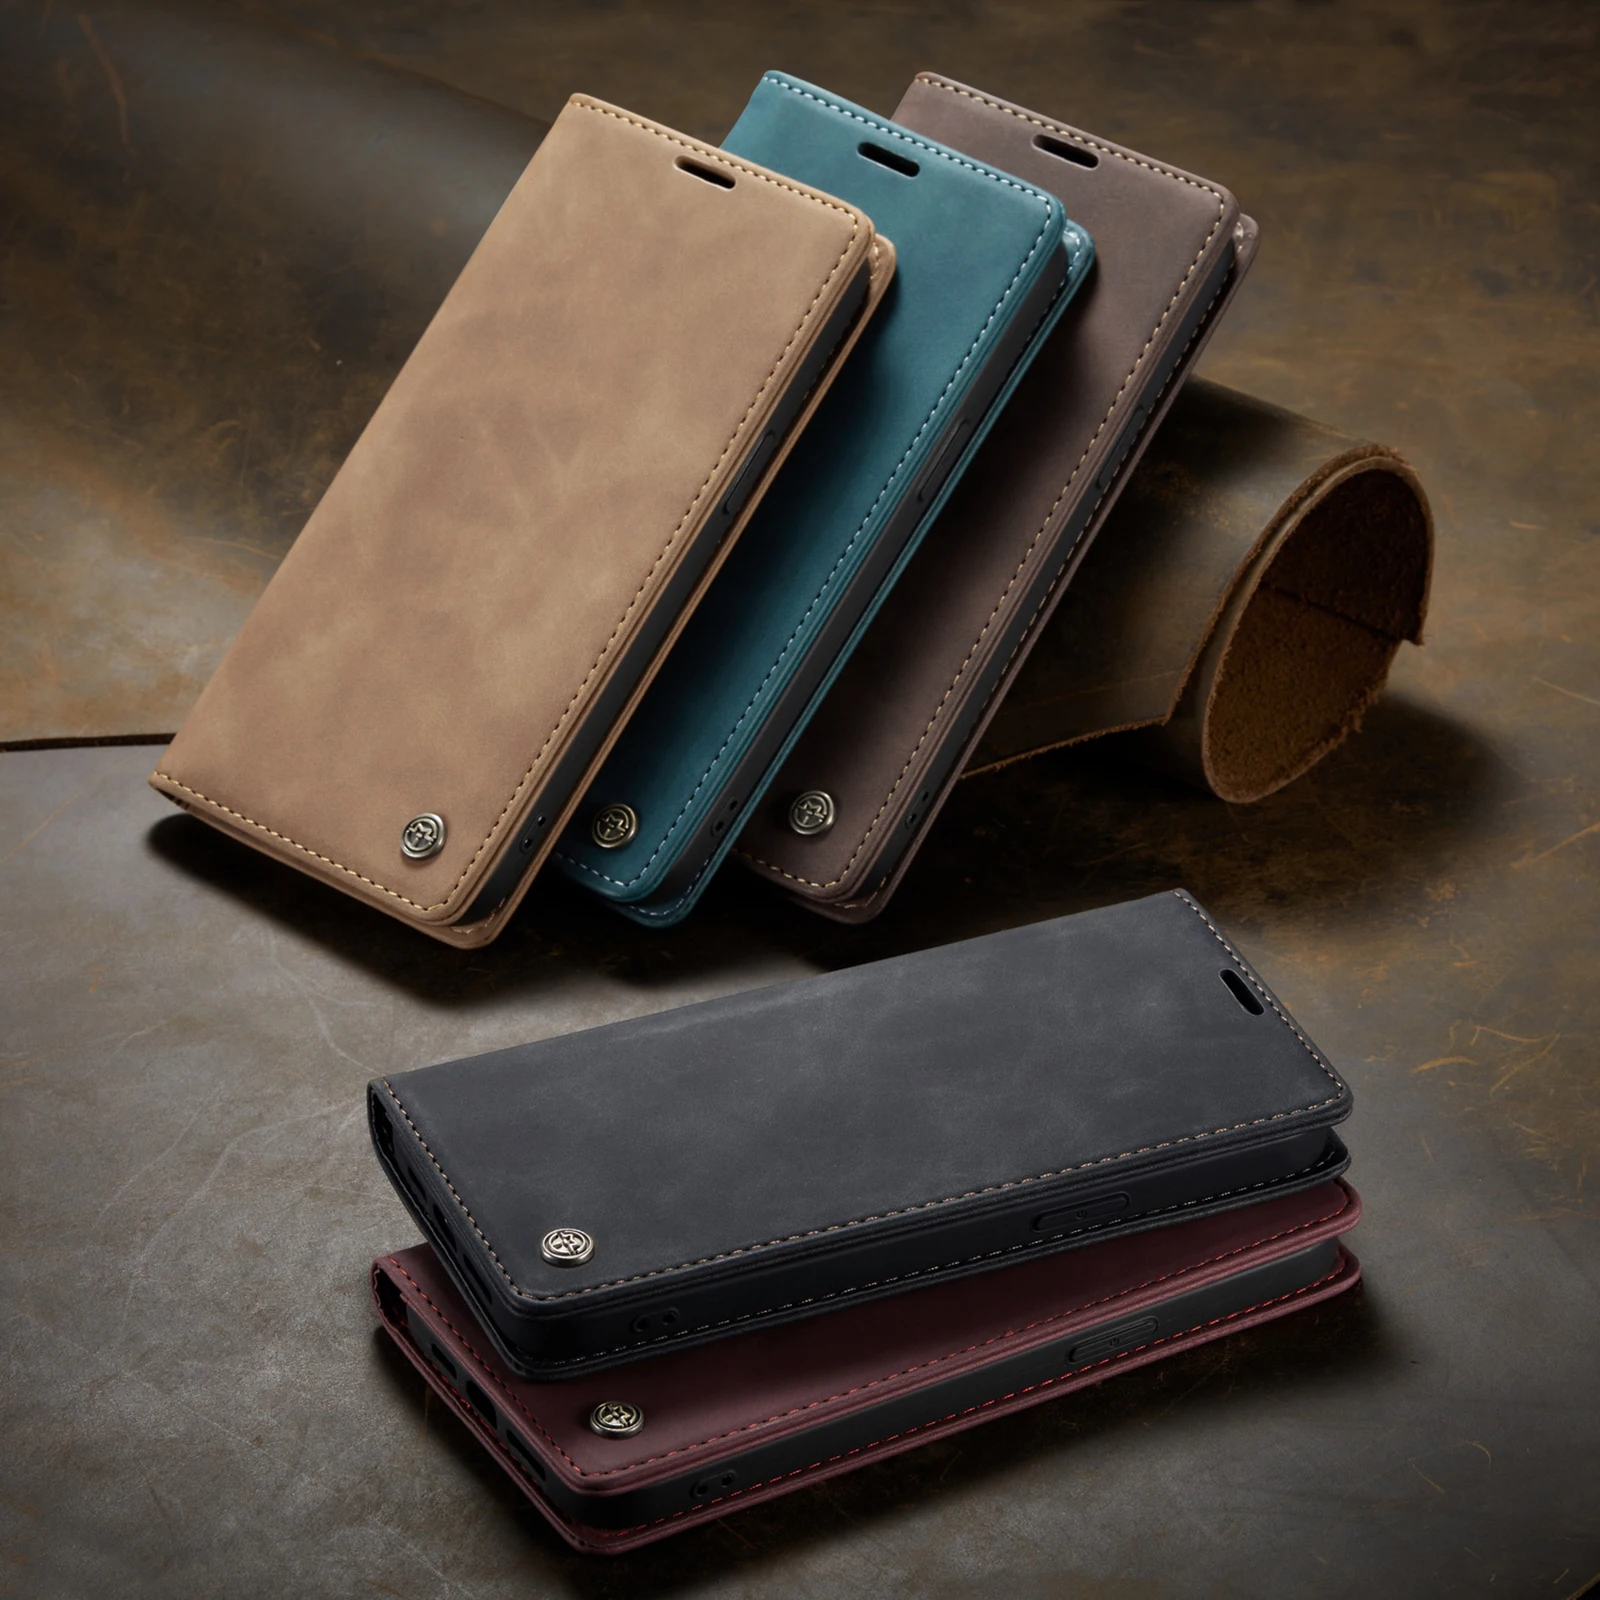 

CaseMe Flip Leather Case For XiaoMi 9 9T CC9 Note10 For RedMi K20 K30 F2Pro Note 8 9S Pro Retro Magnetic Card Stand Wallet Cover